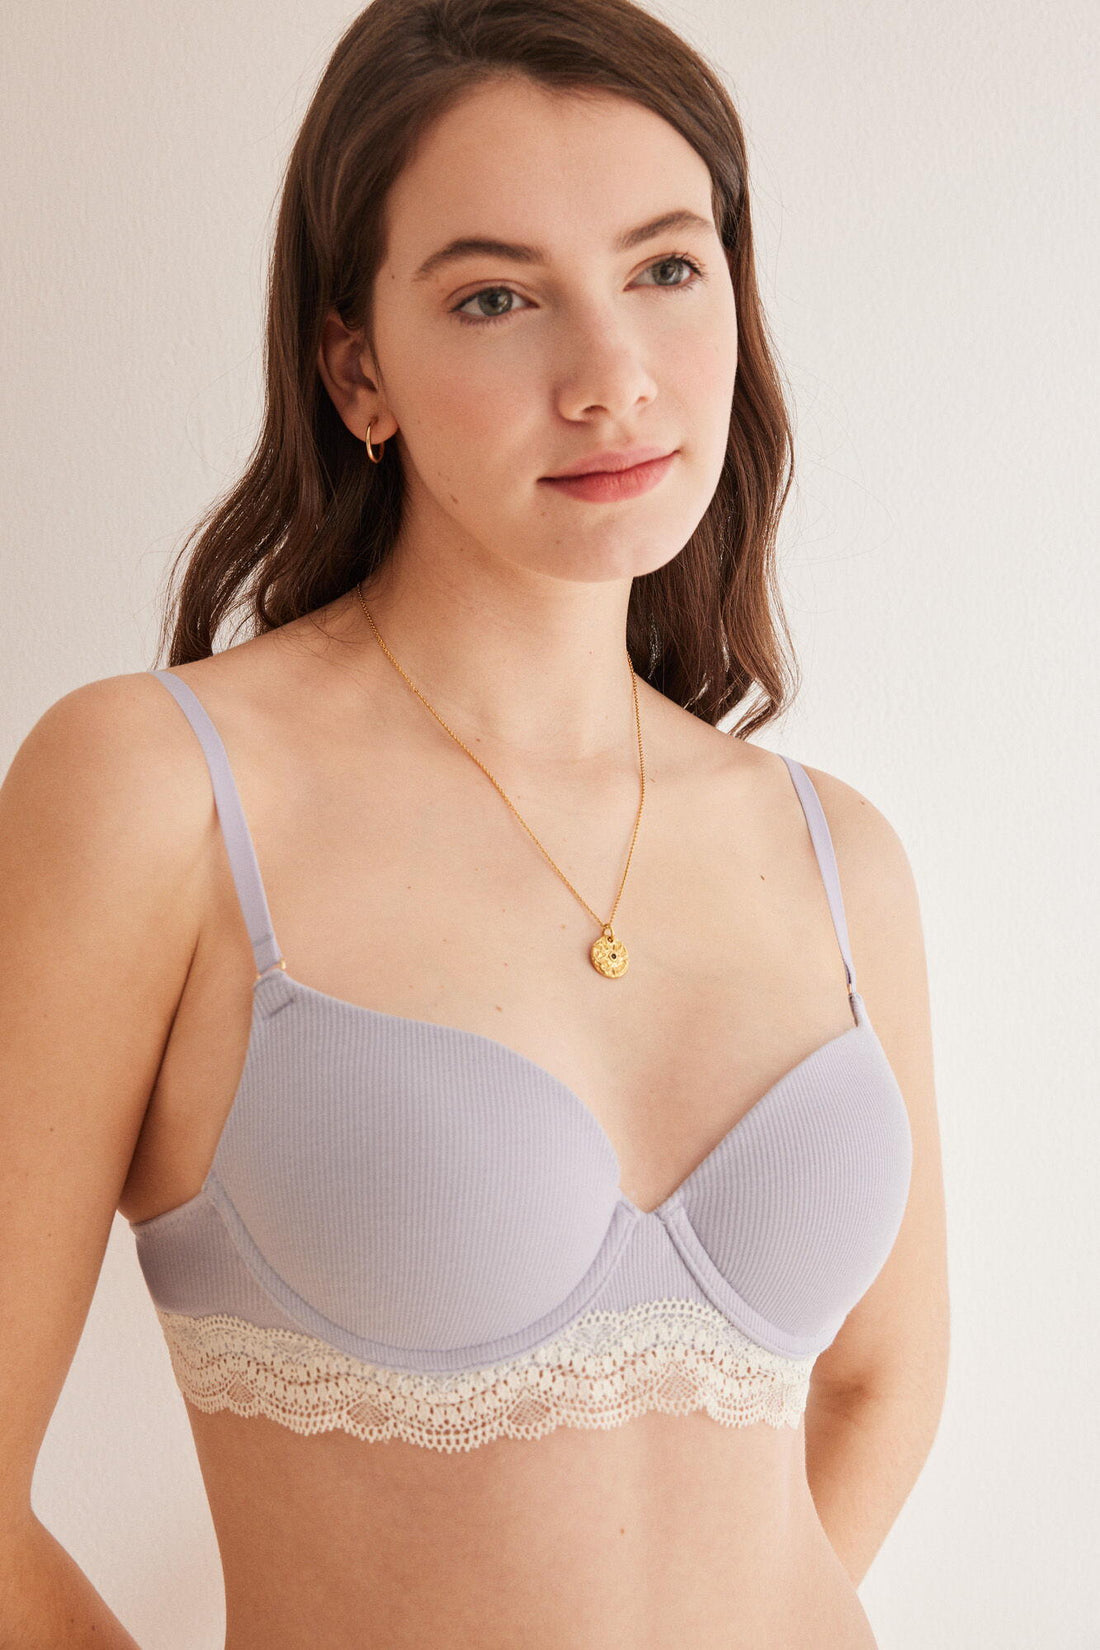 Cotton Push Up Bra In Different Cup Sizes_5057064_75_01